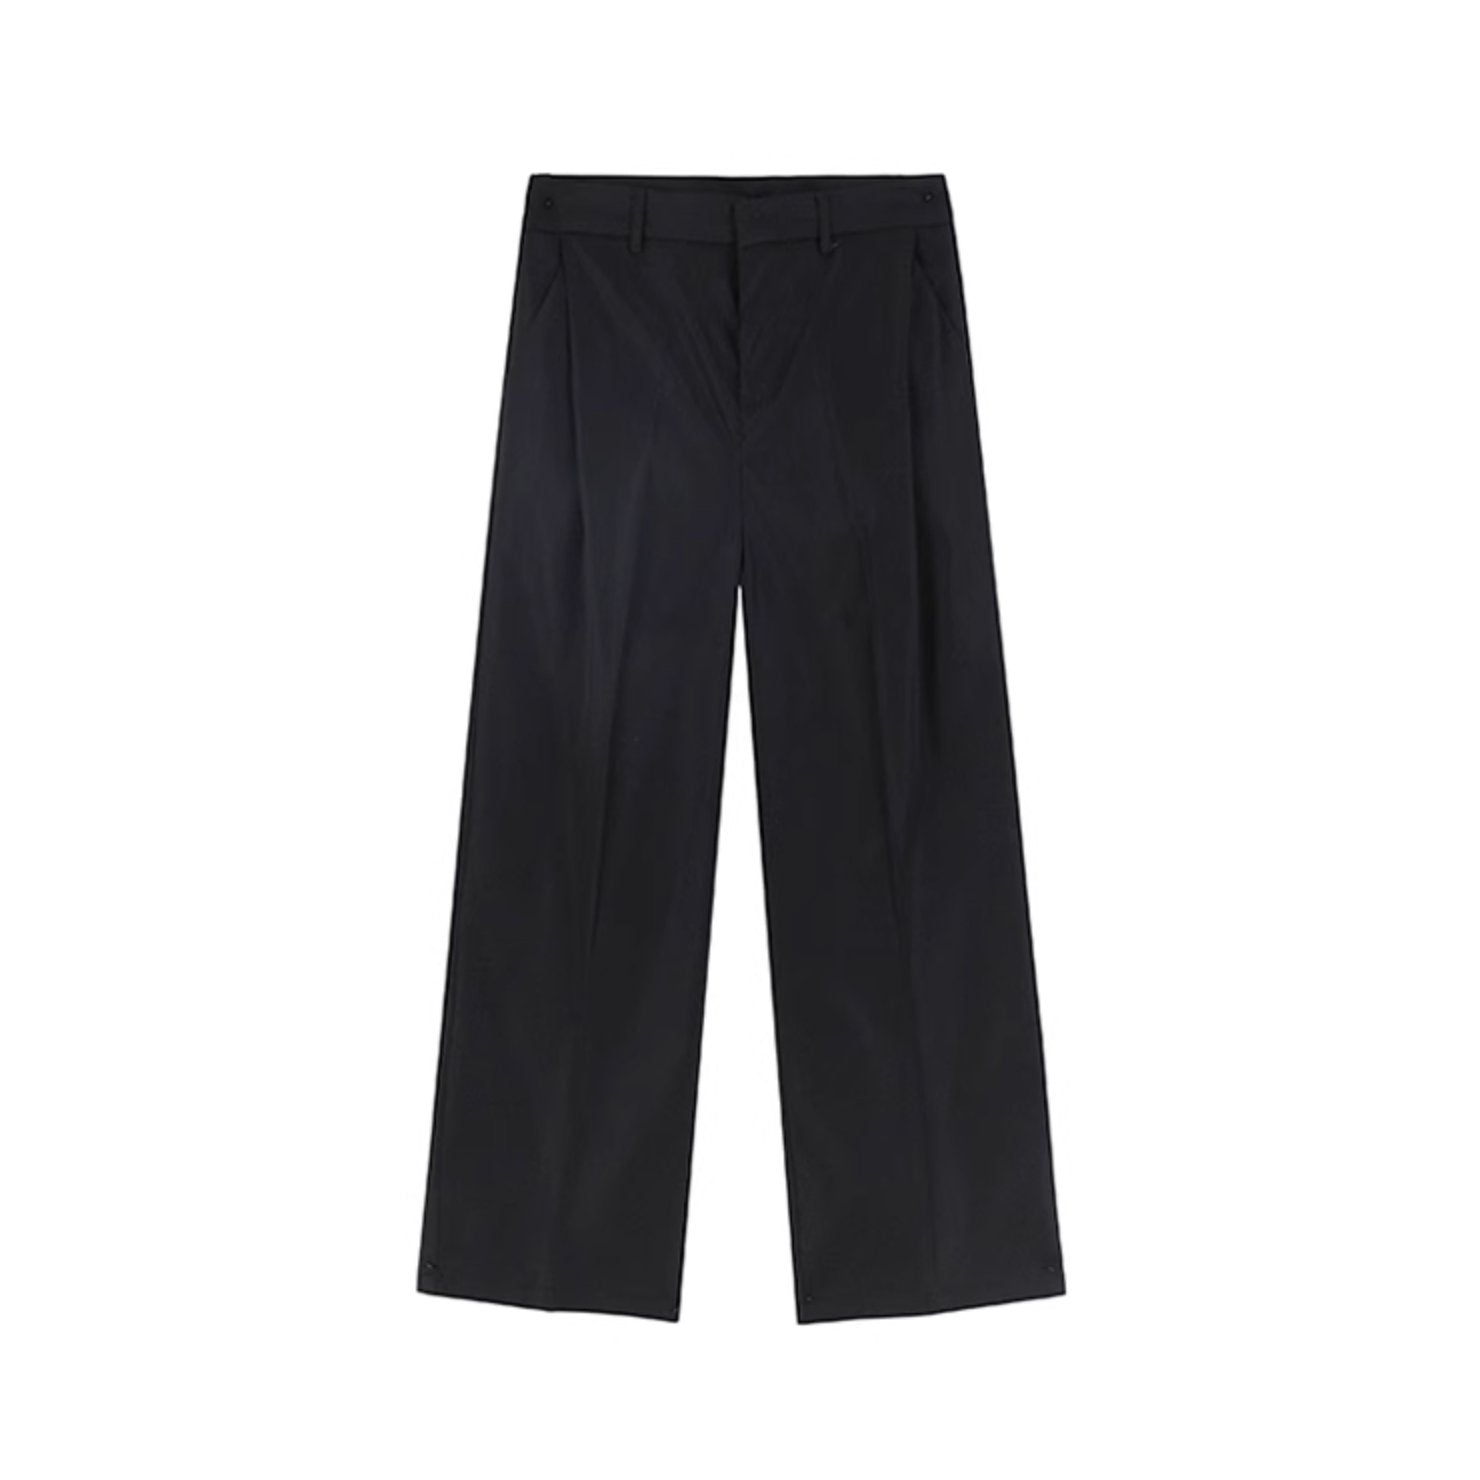 WIDE ANKLE PANTS - Stockbay